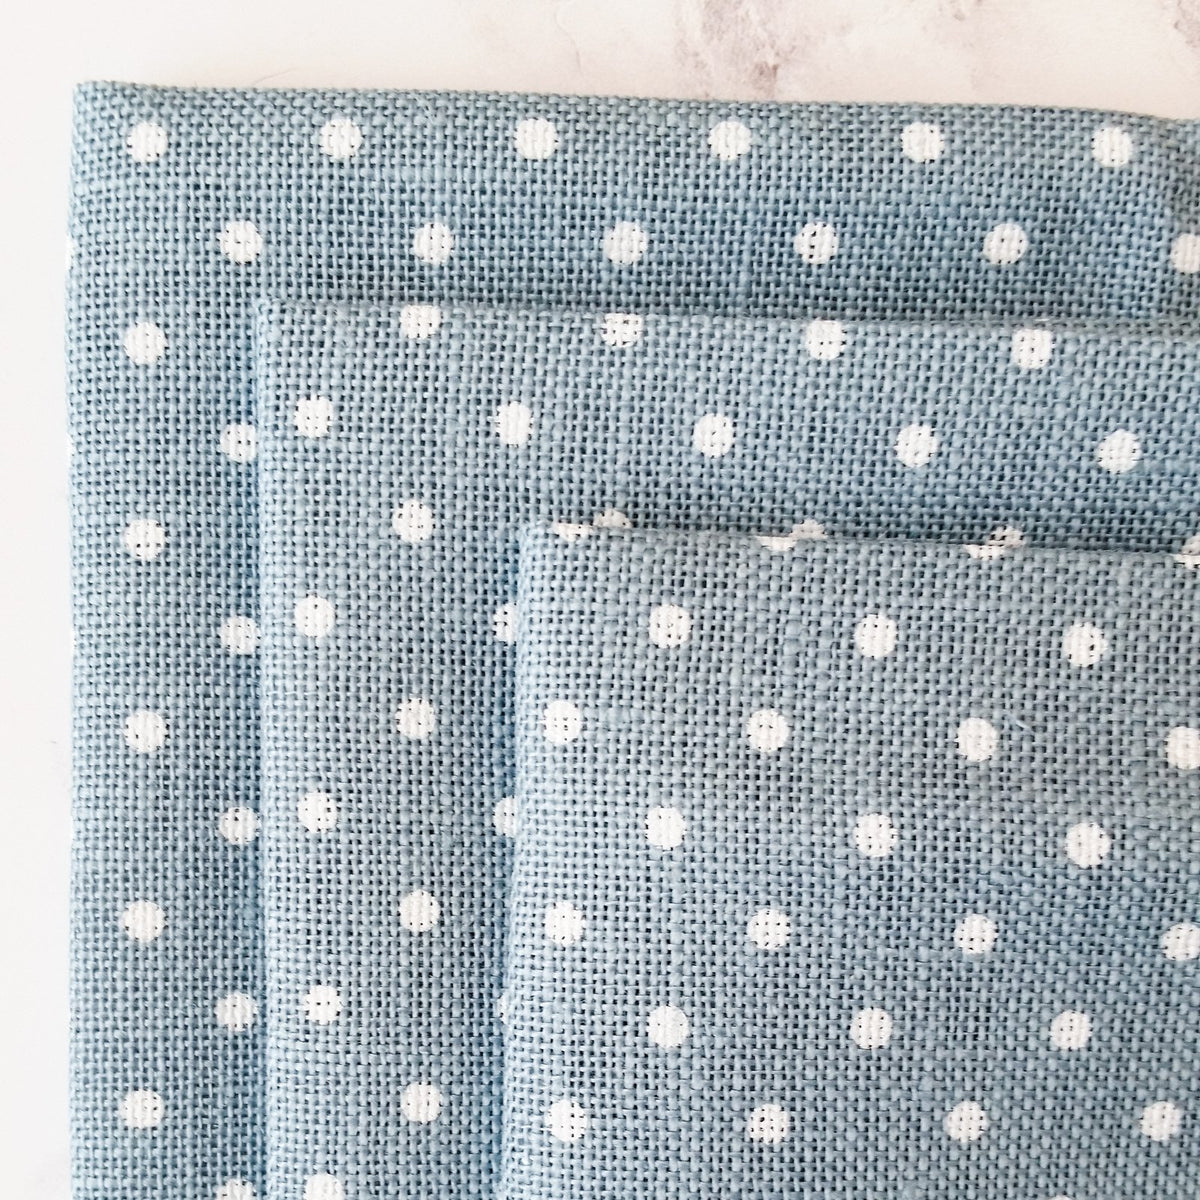 Blue/White Polka Dot Linen Fabric for Cross Stitch and Embroidery